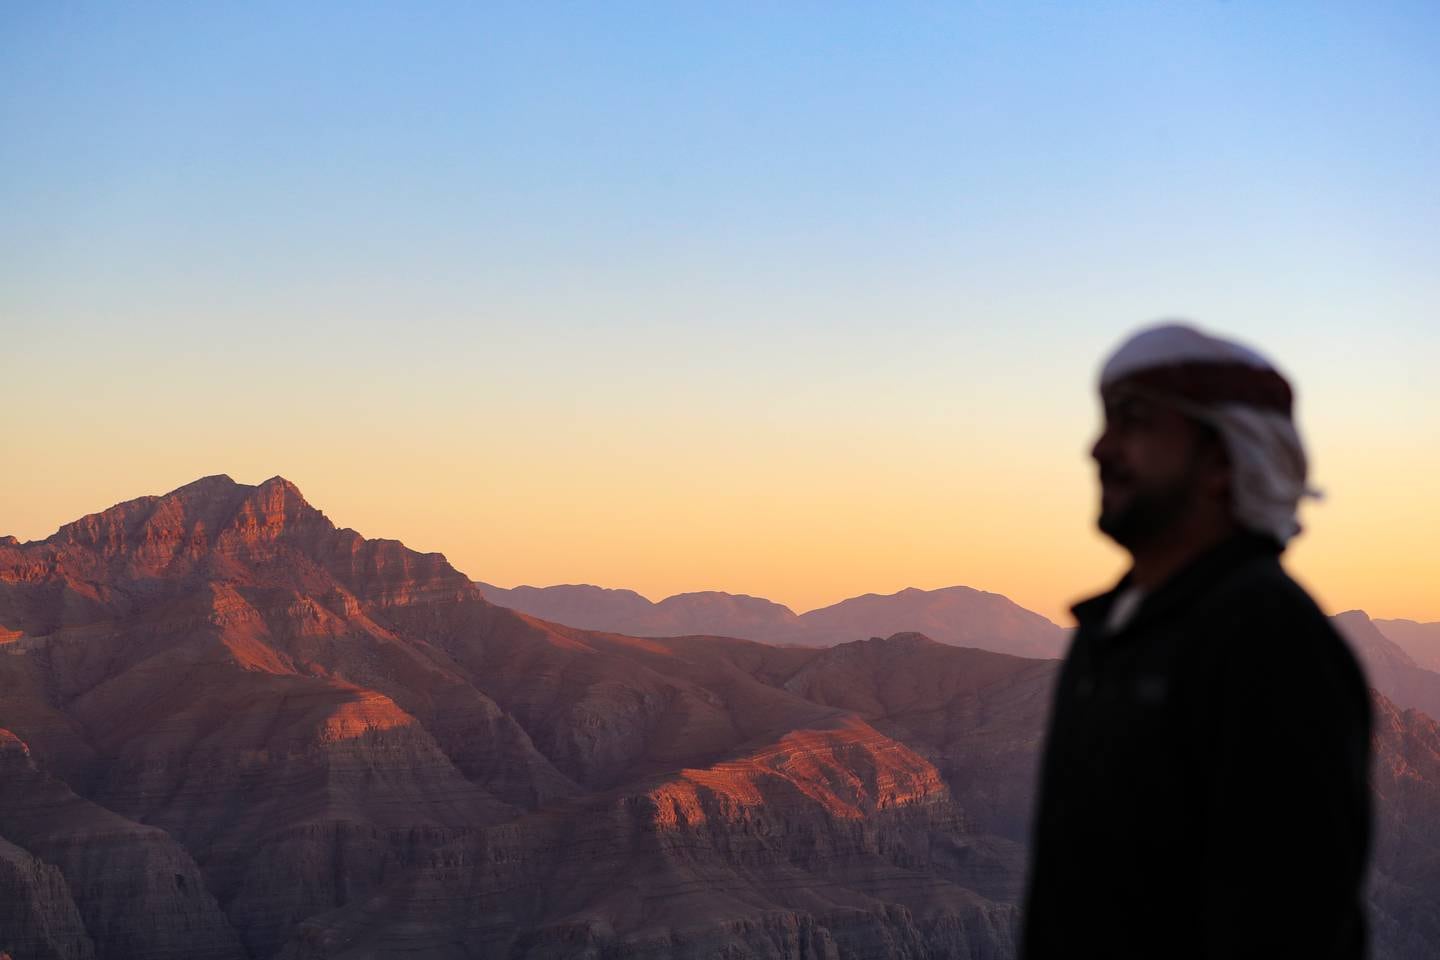 A sunset seen from the mountains in Ras Al Khaimah, UAE. Chris Whiteoak / The National